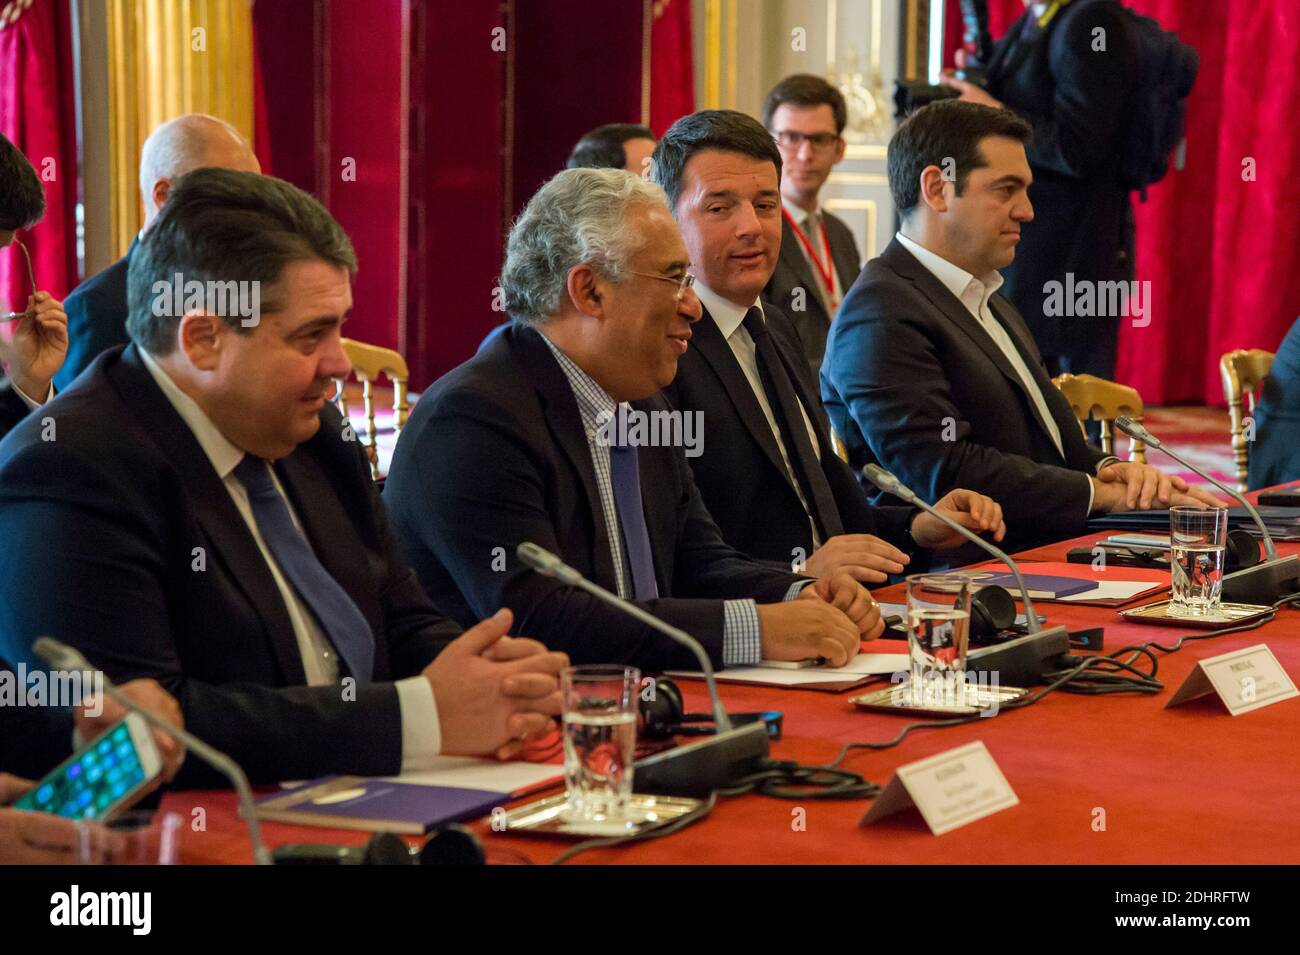 Vice Chancellor of Germany Sigmar Gabriel, Portugal's PM Antonio Costa, Italy's PM Matteo Renzi, Greek PM Alexis Tsipras are seen during a meeting of European social democratic leaders at the Elysee Palace in Paris, France, on March 12, 2016. Photo by Gilles Rolle/Pool/ABACAPRESS.COM Stock Photo